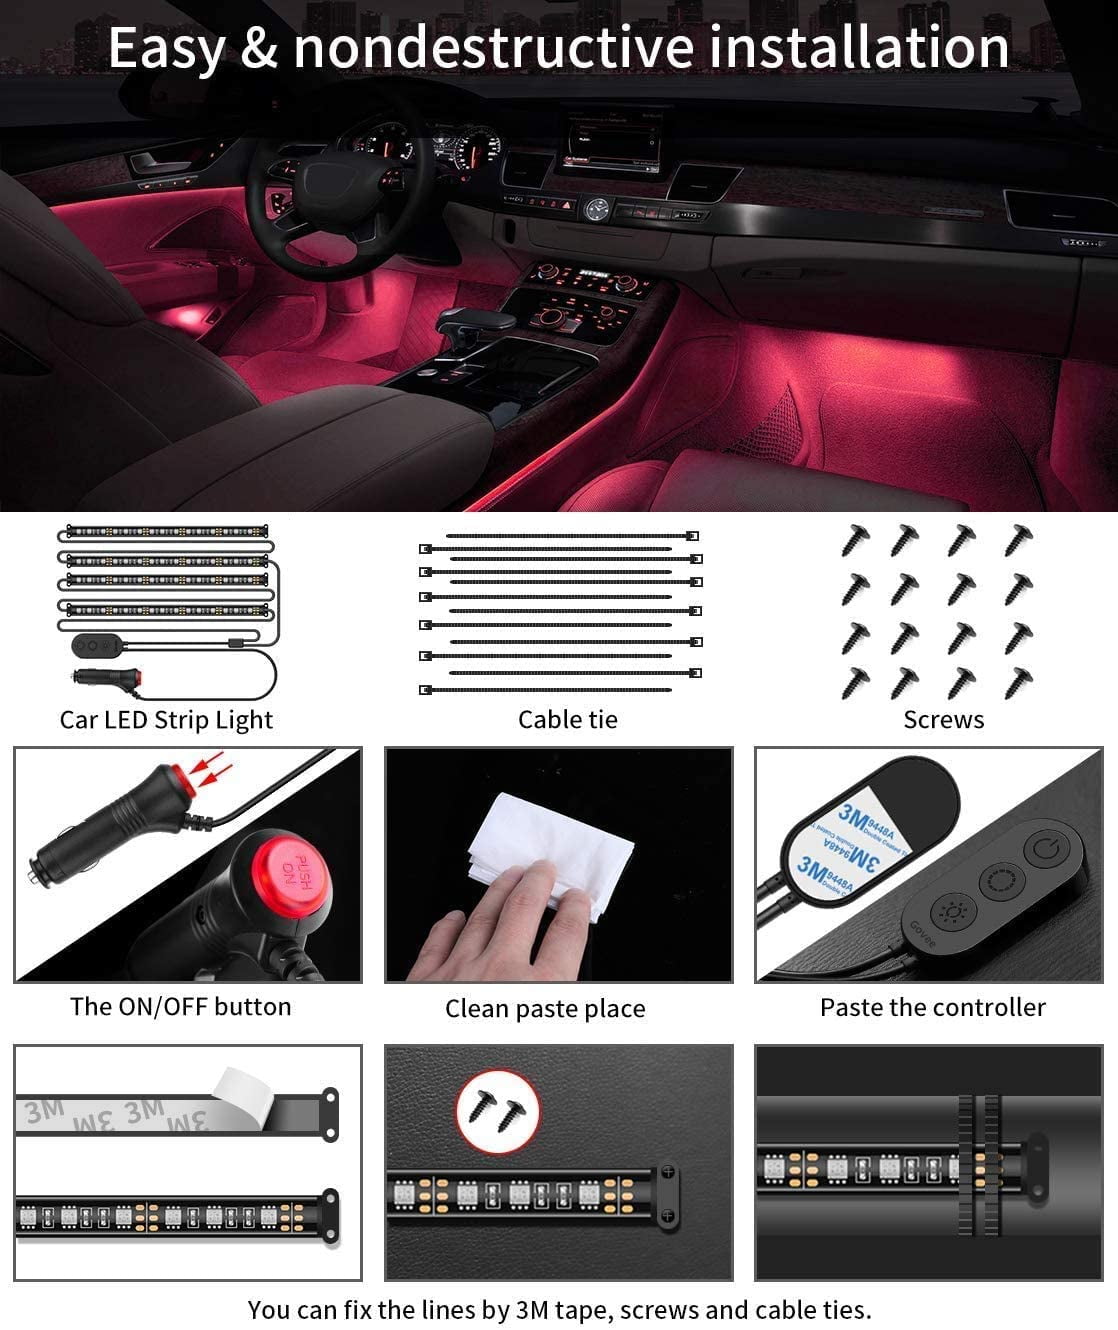 Govee Car LED Interior Lights Install & Review - AFFORDABLE ($16) Interior  lighting for your Car! 